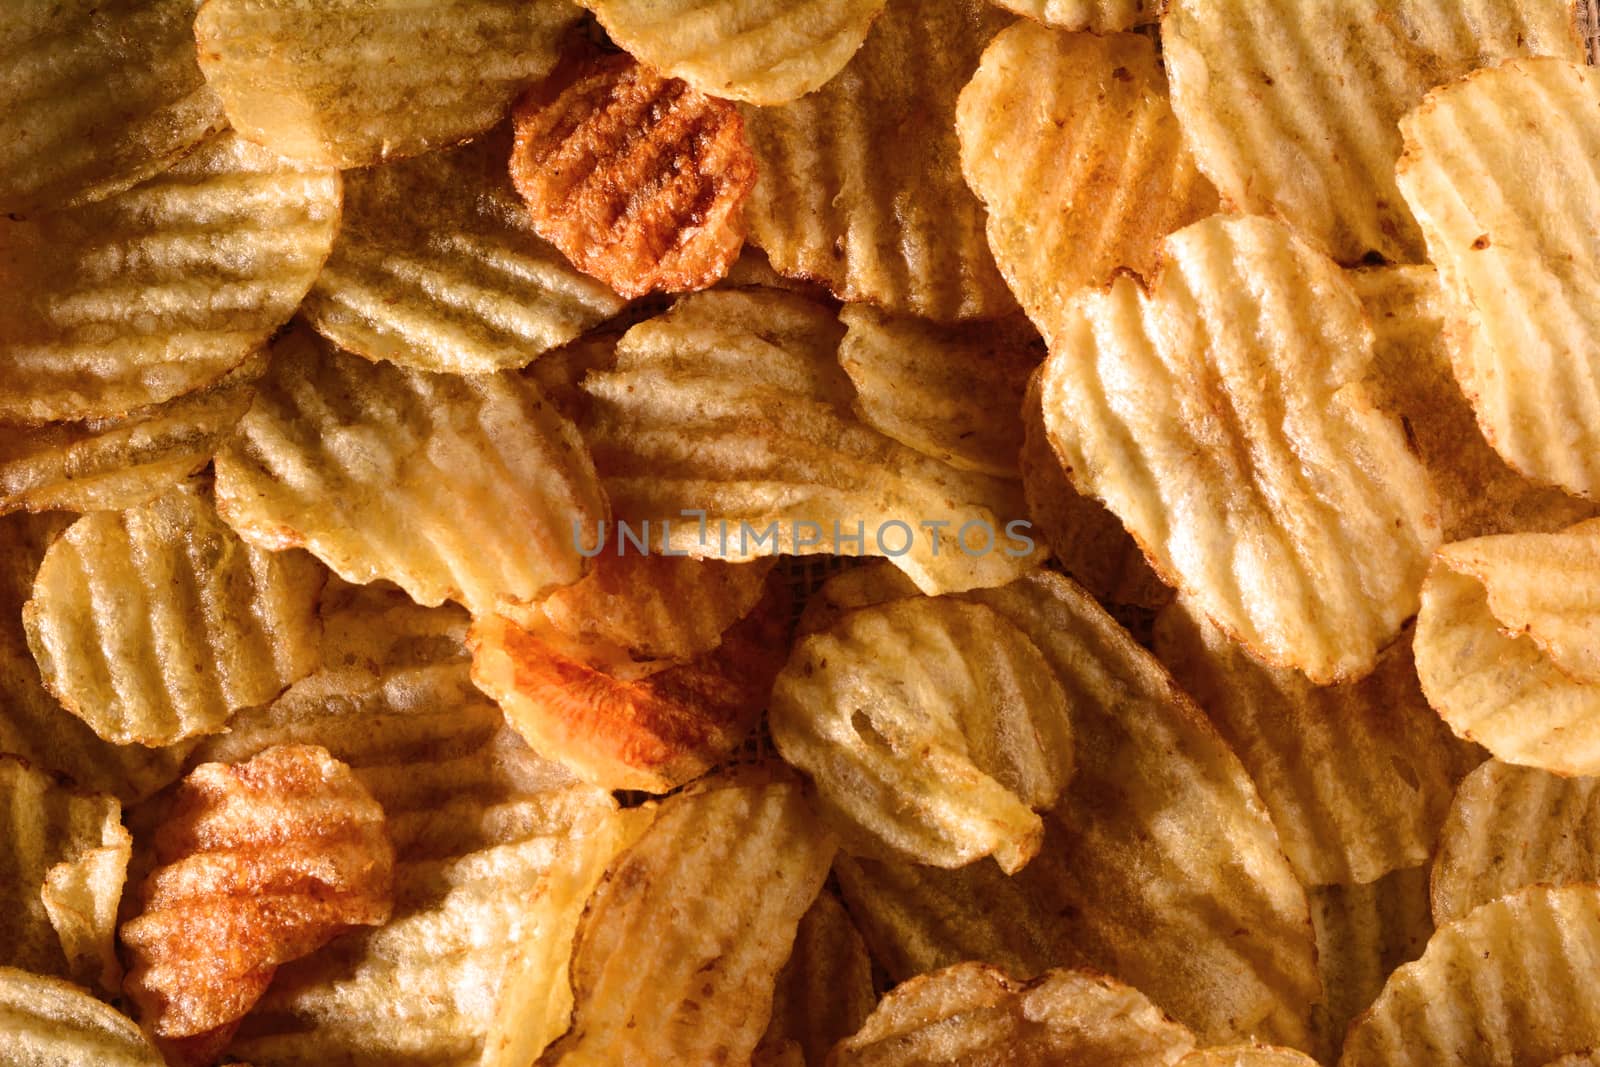 Potato Chip Detail shot from a high angle with warm light.